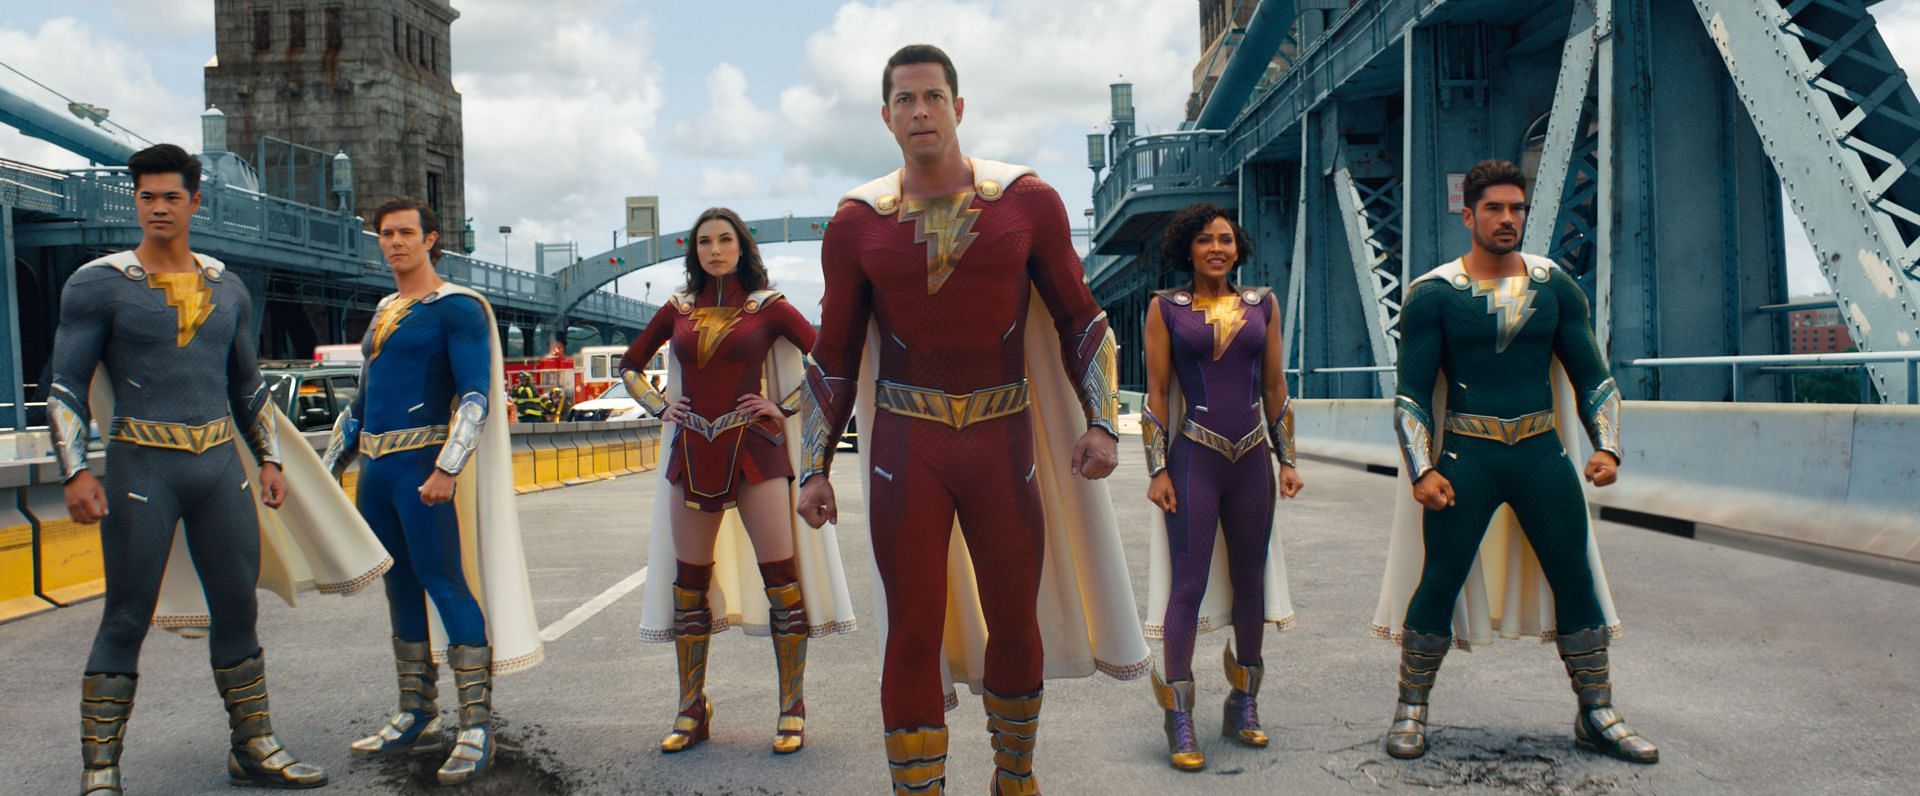 A still from the trailer of Shazam 2: Fury of the Gods (Image via Warner Bros. Discovery)